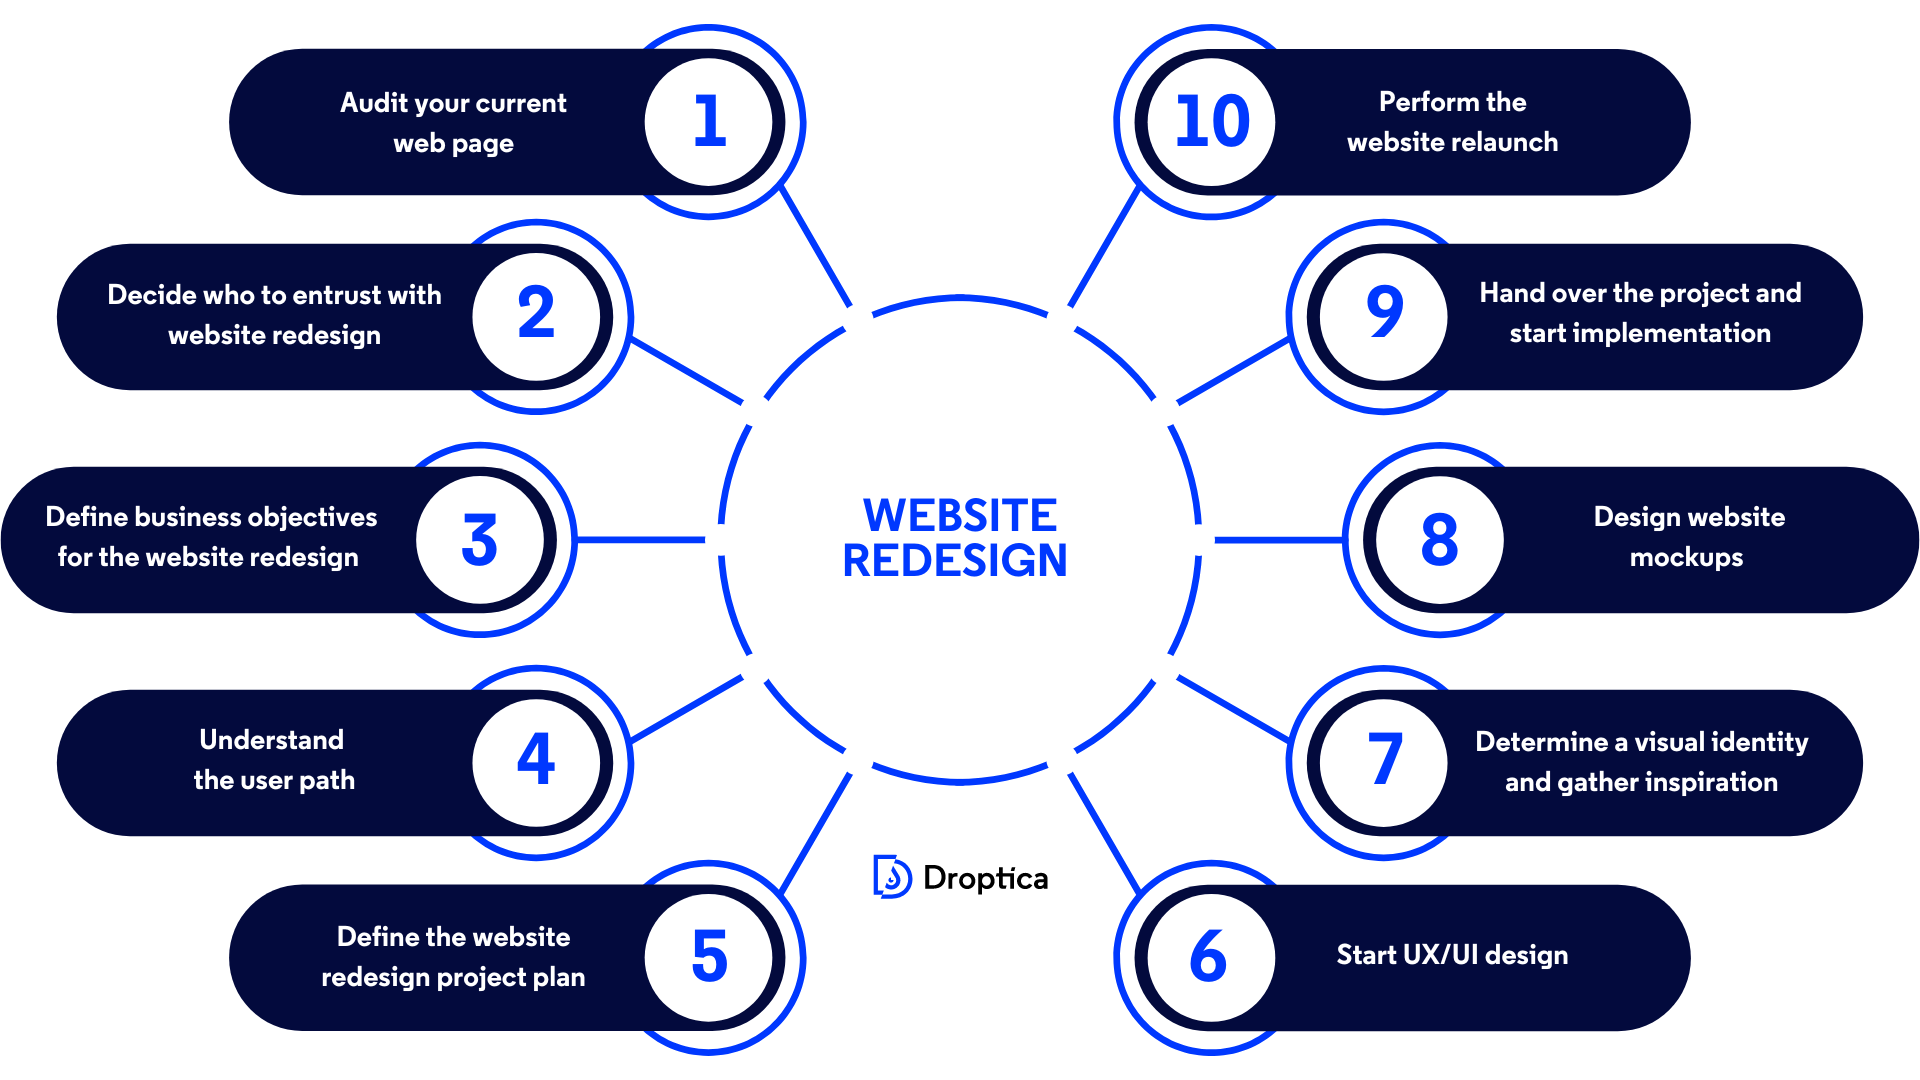 Website redesign is a process that includes auditing the current web page and setting a strategy.